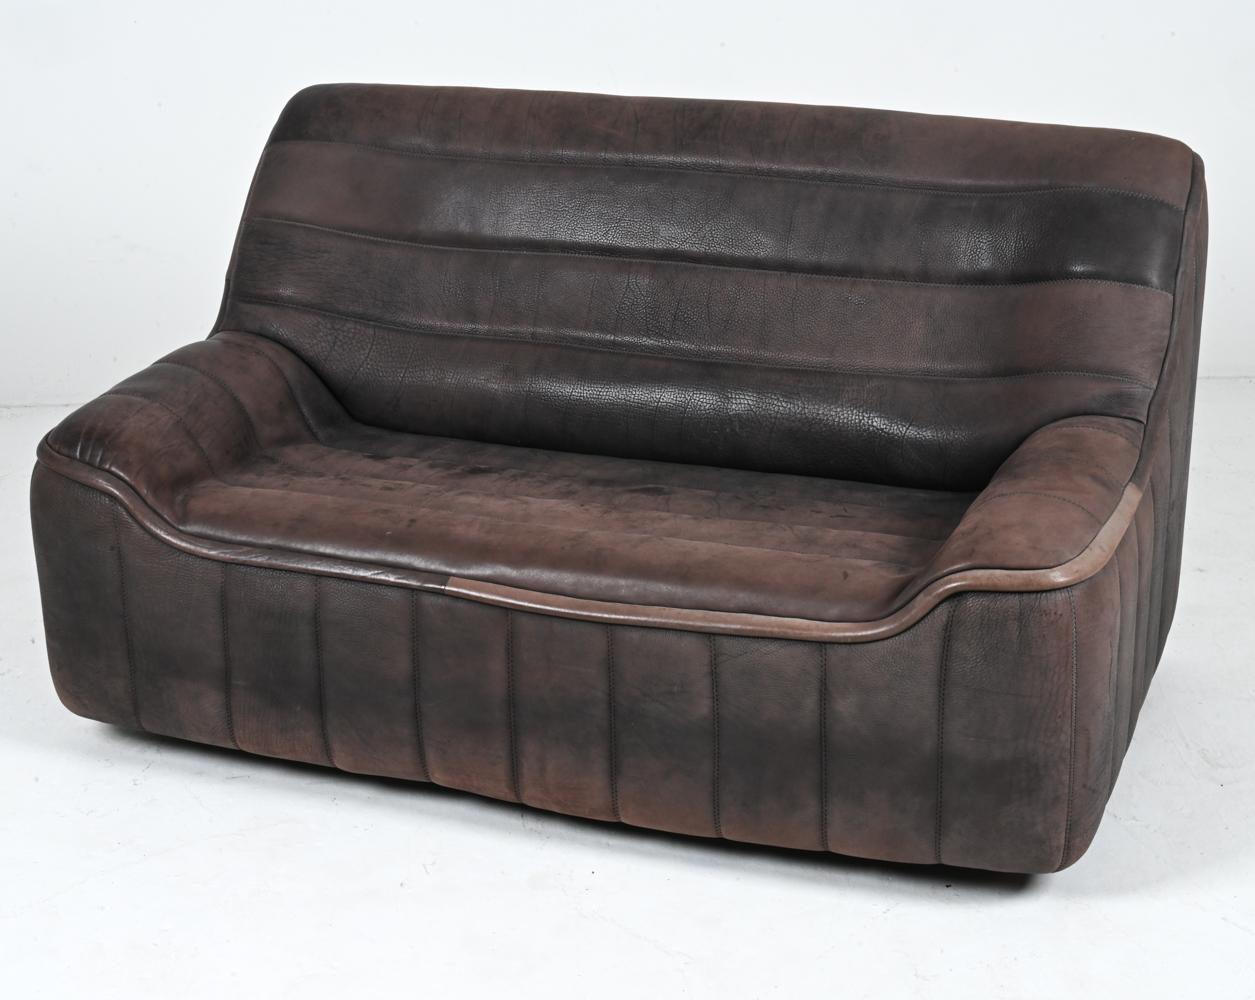 Introducing the sophisticated and handsome Model DS-84 two-seat sofa in luxurious brown leather by De Sede, a true masterpiece from the 1970's. This iconic piece is a harmonious blend of innovative design and Swiss craftsmanship, embodying the